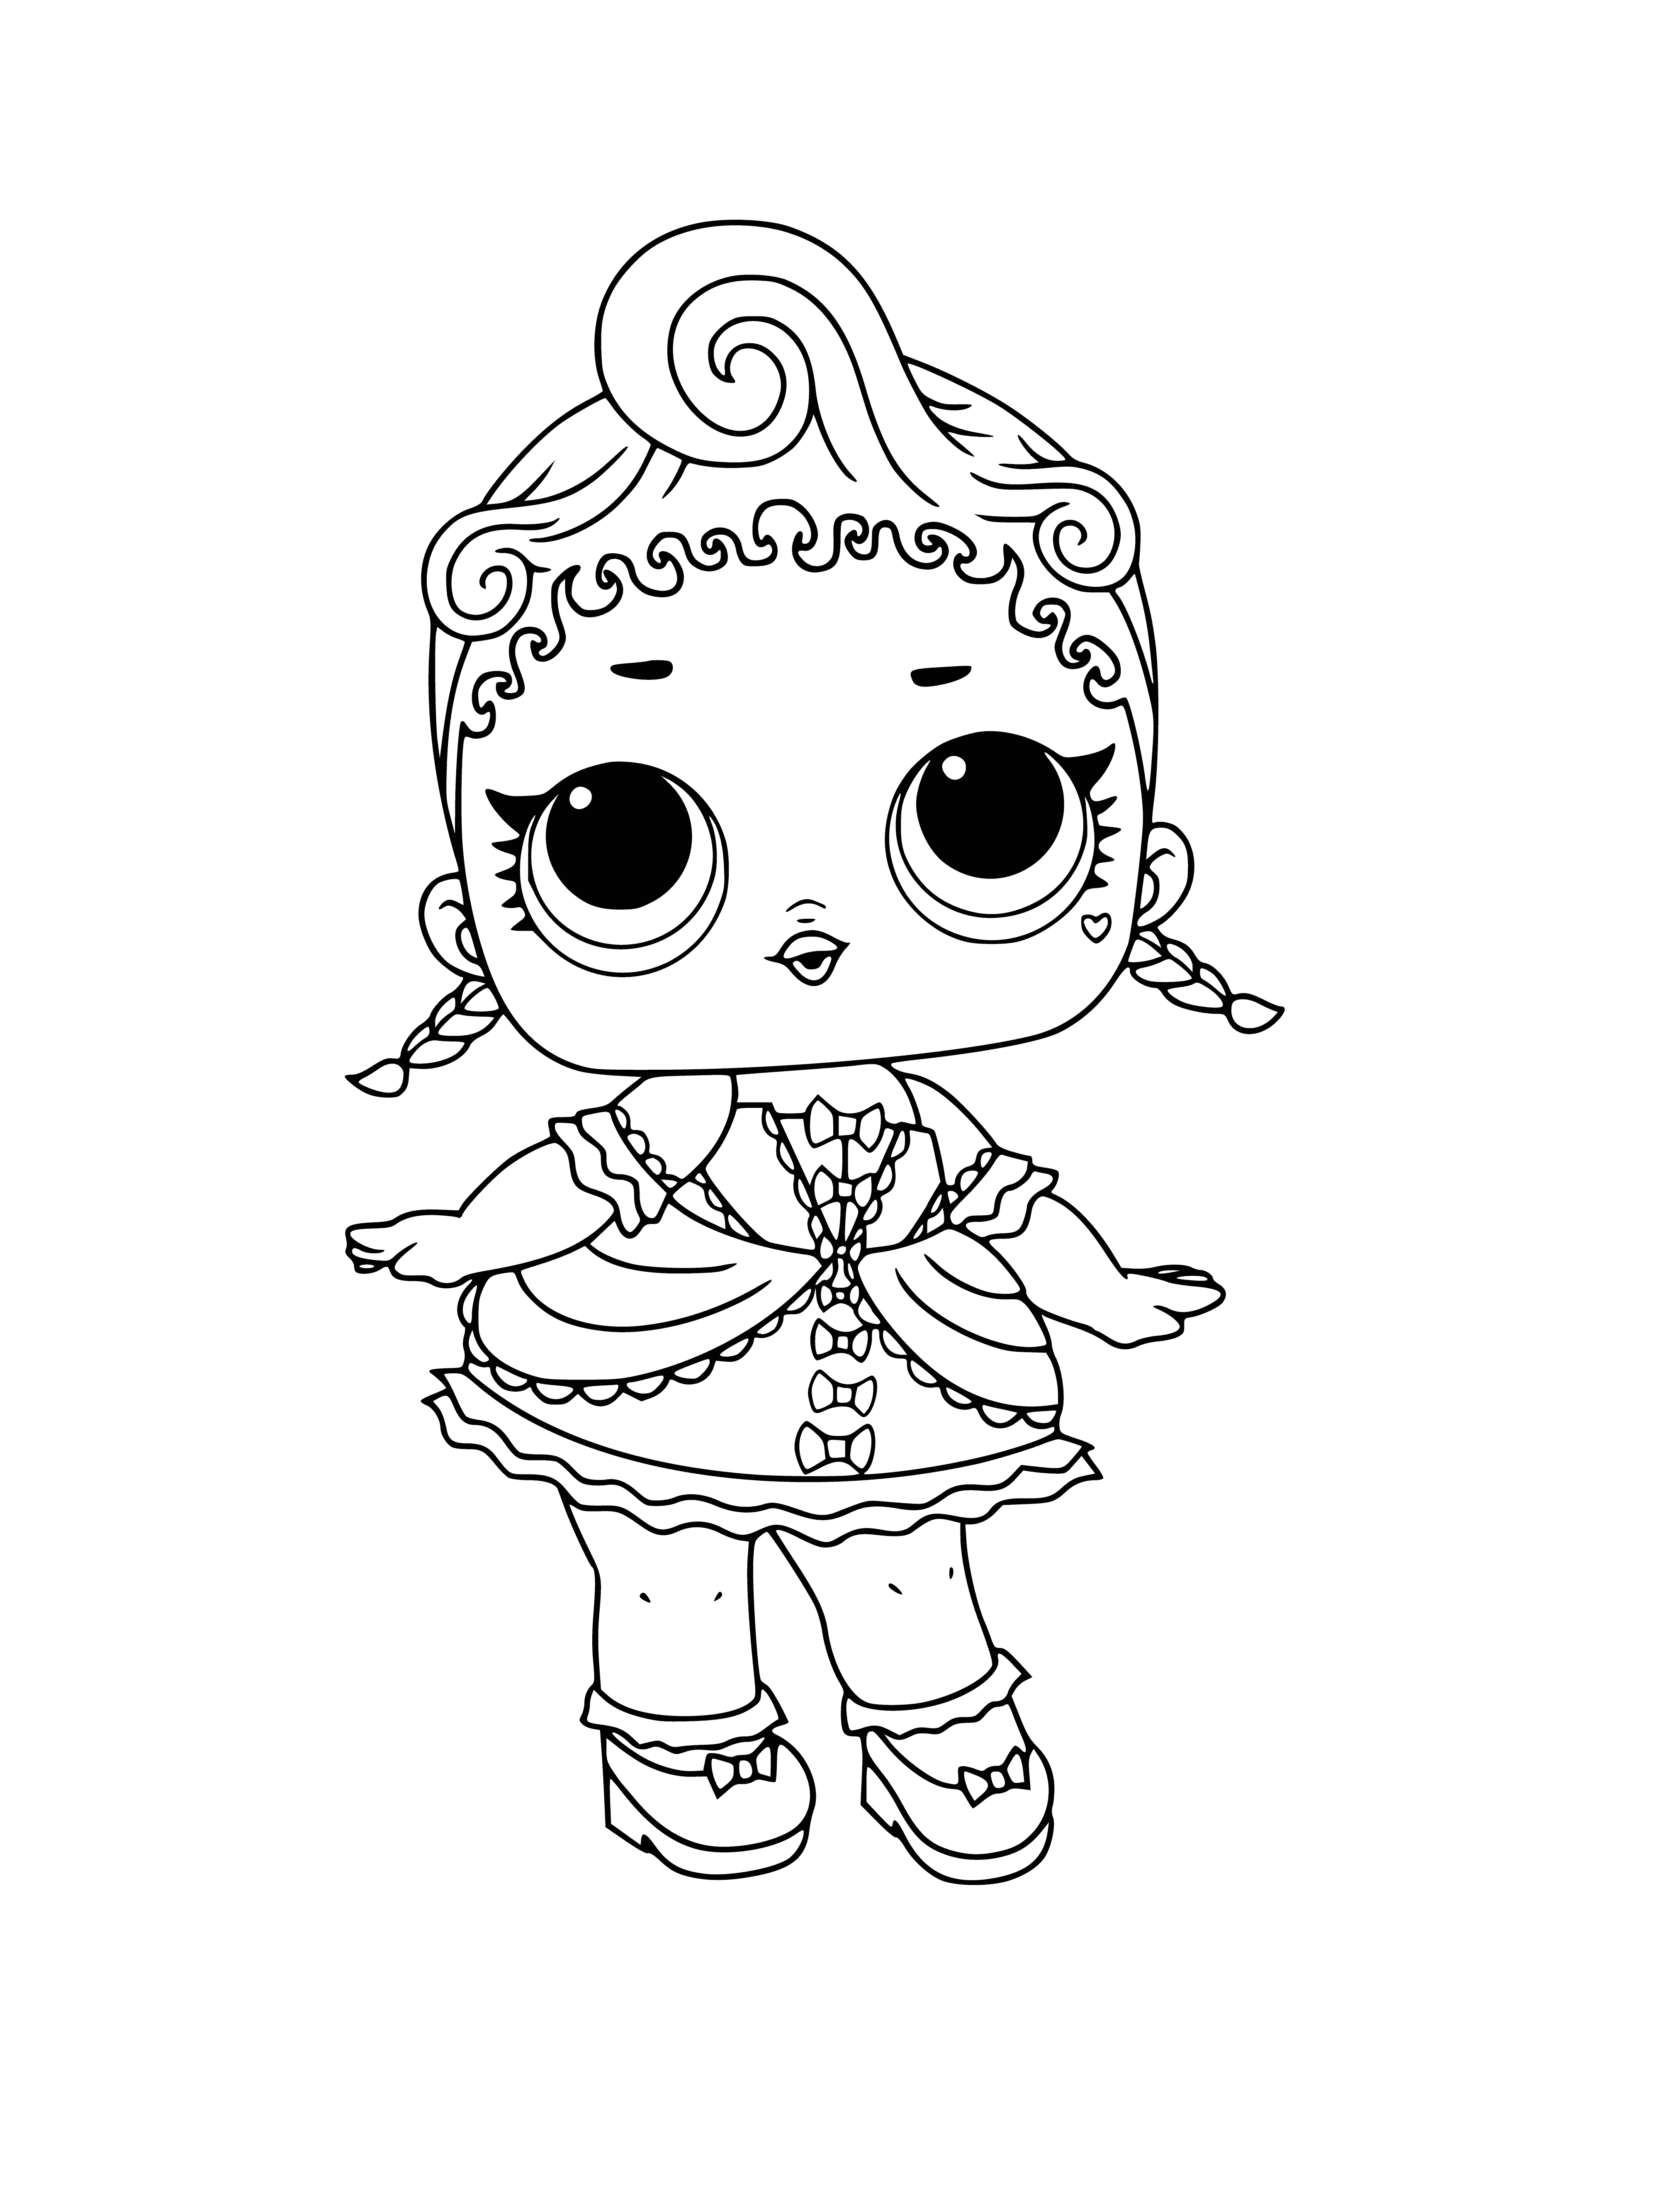 coloring page: L.O.L. Series 1 Doll Royal High-Ney is a blonde doll wearing a purple tiara, white shoes, and a purple & white dress with a tulle skirt.